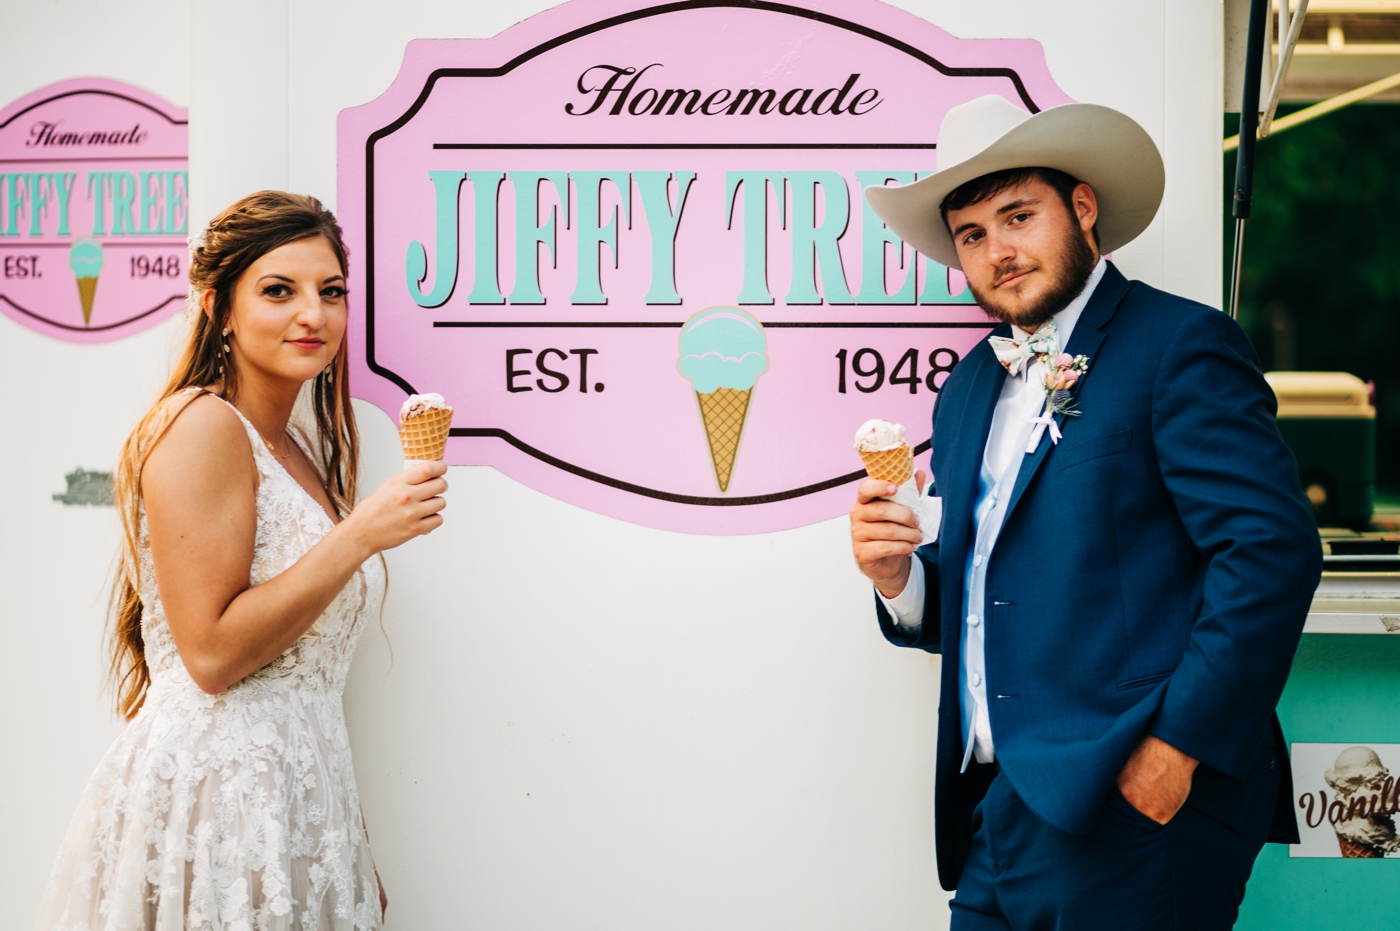 Bride and groom enjoying ice cream from their ice cream truck at their wedding reception